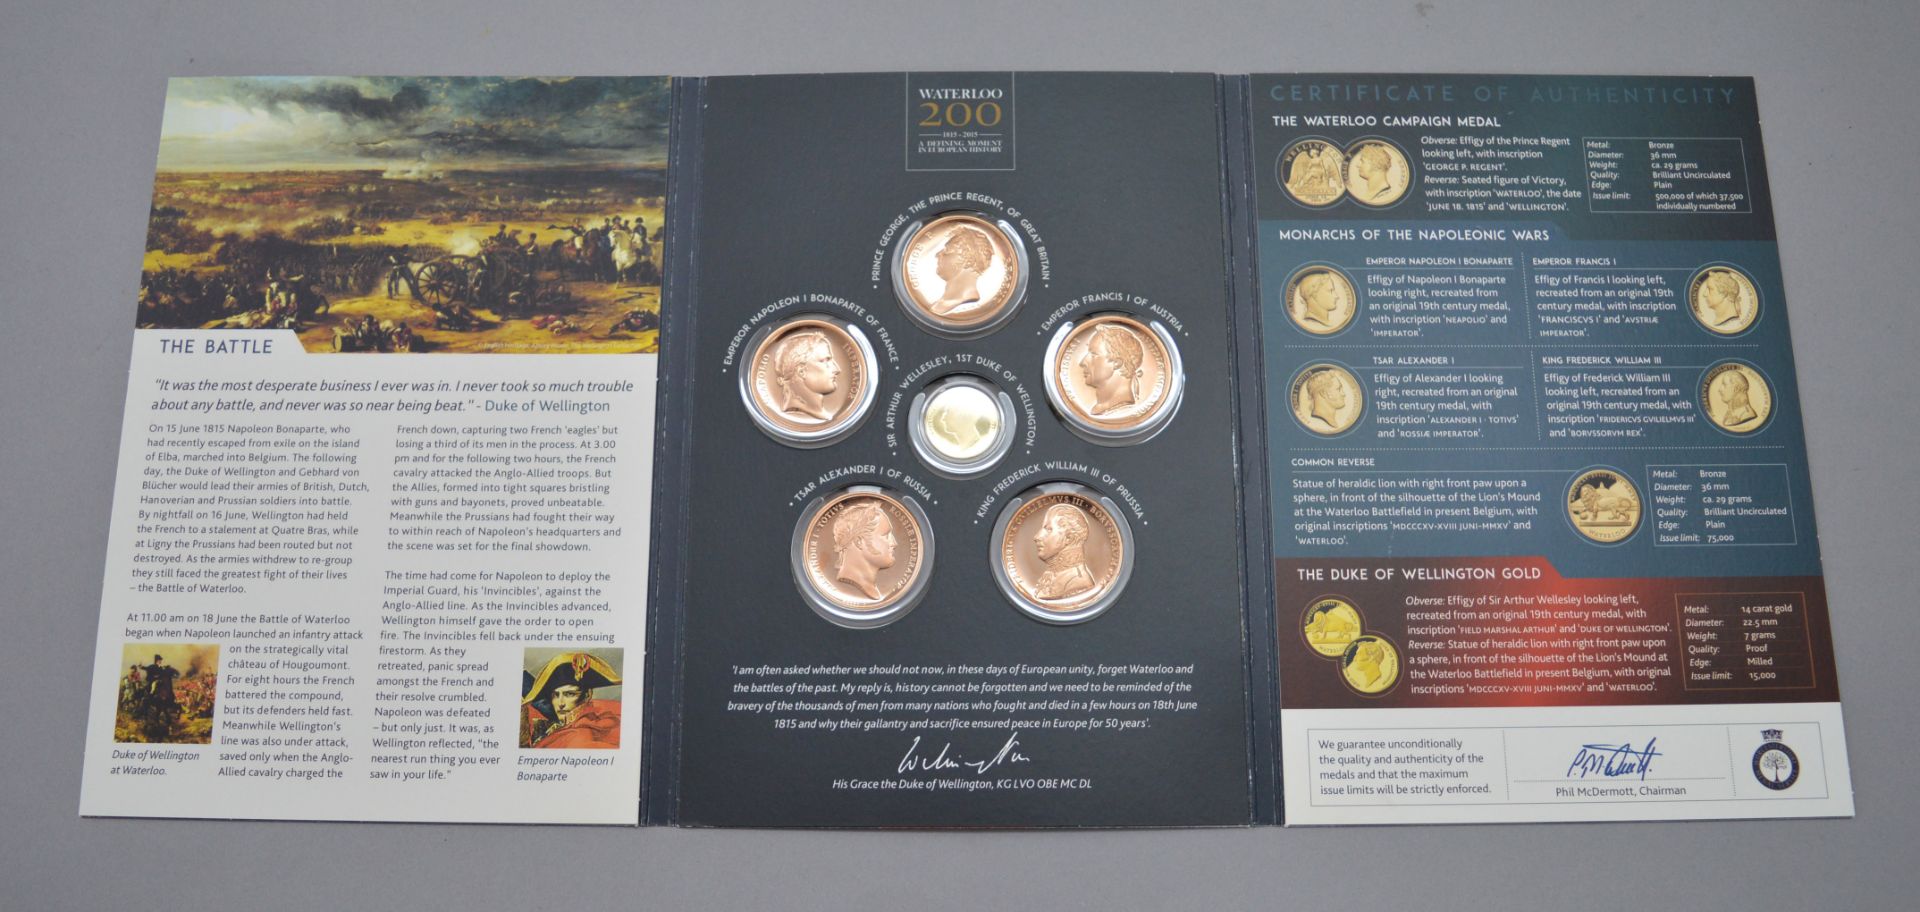 A Waterloo 200 coin set by the Worcestershire Medal Service containing 5 bronze medallions and a